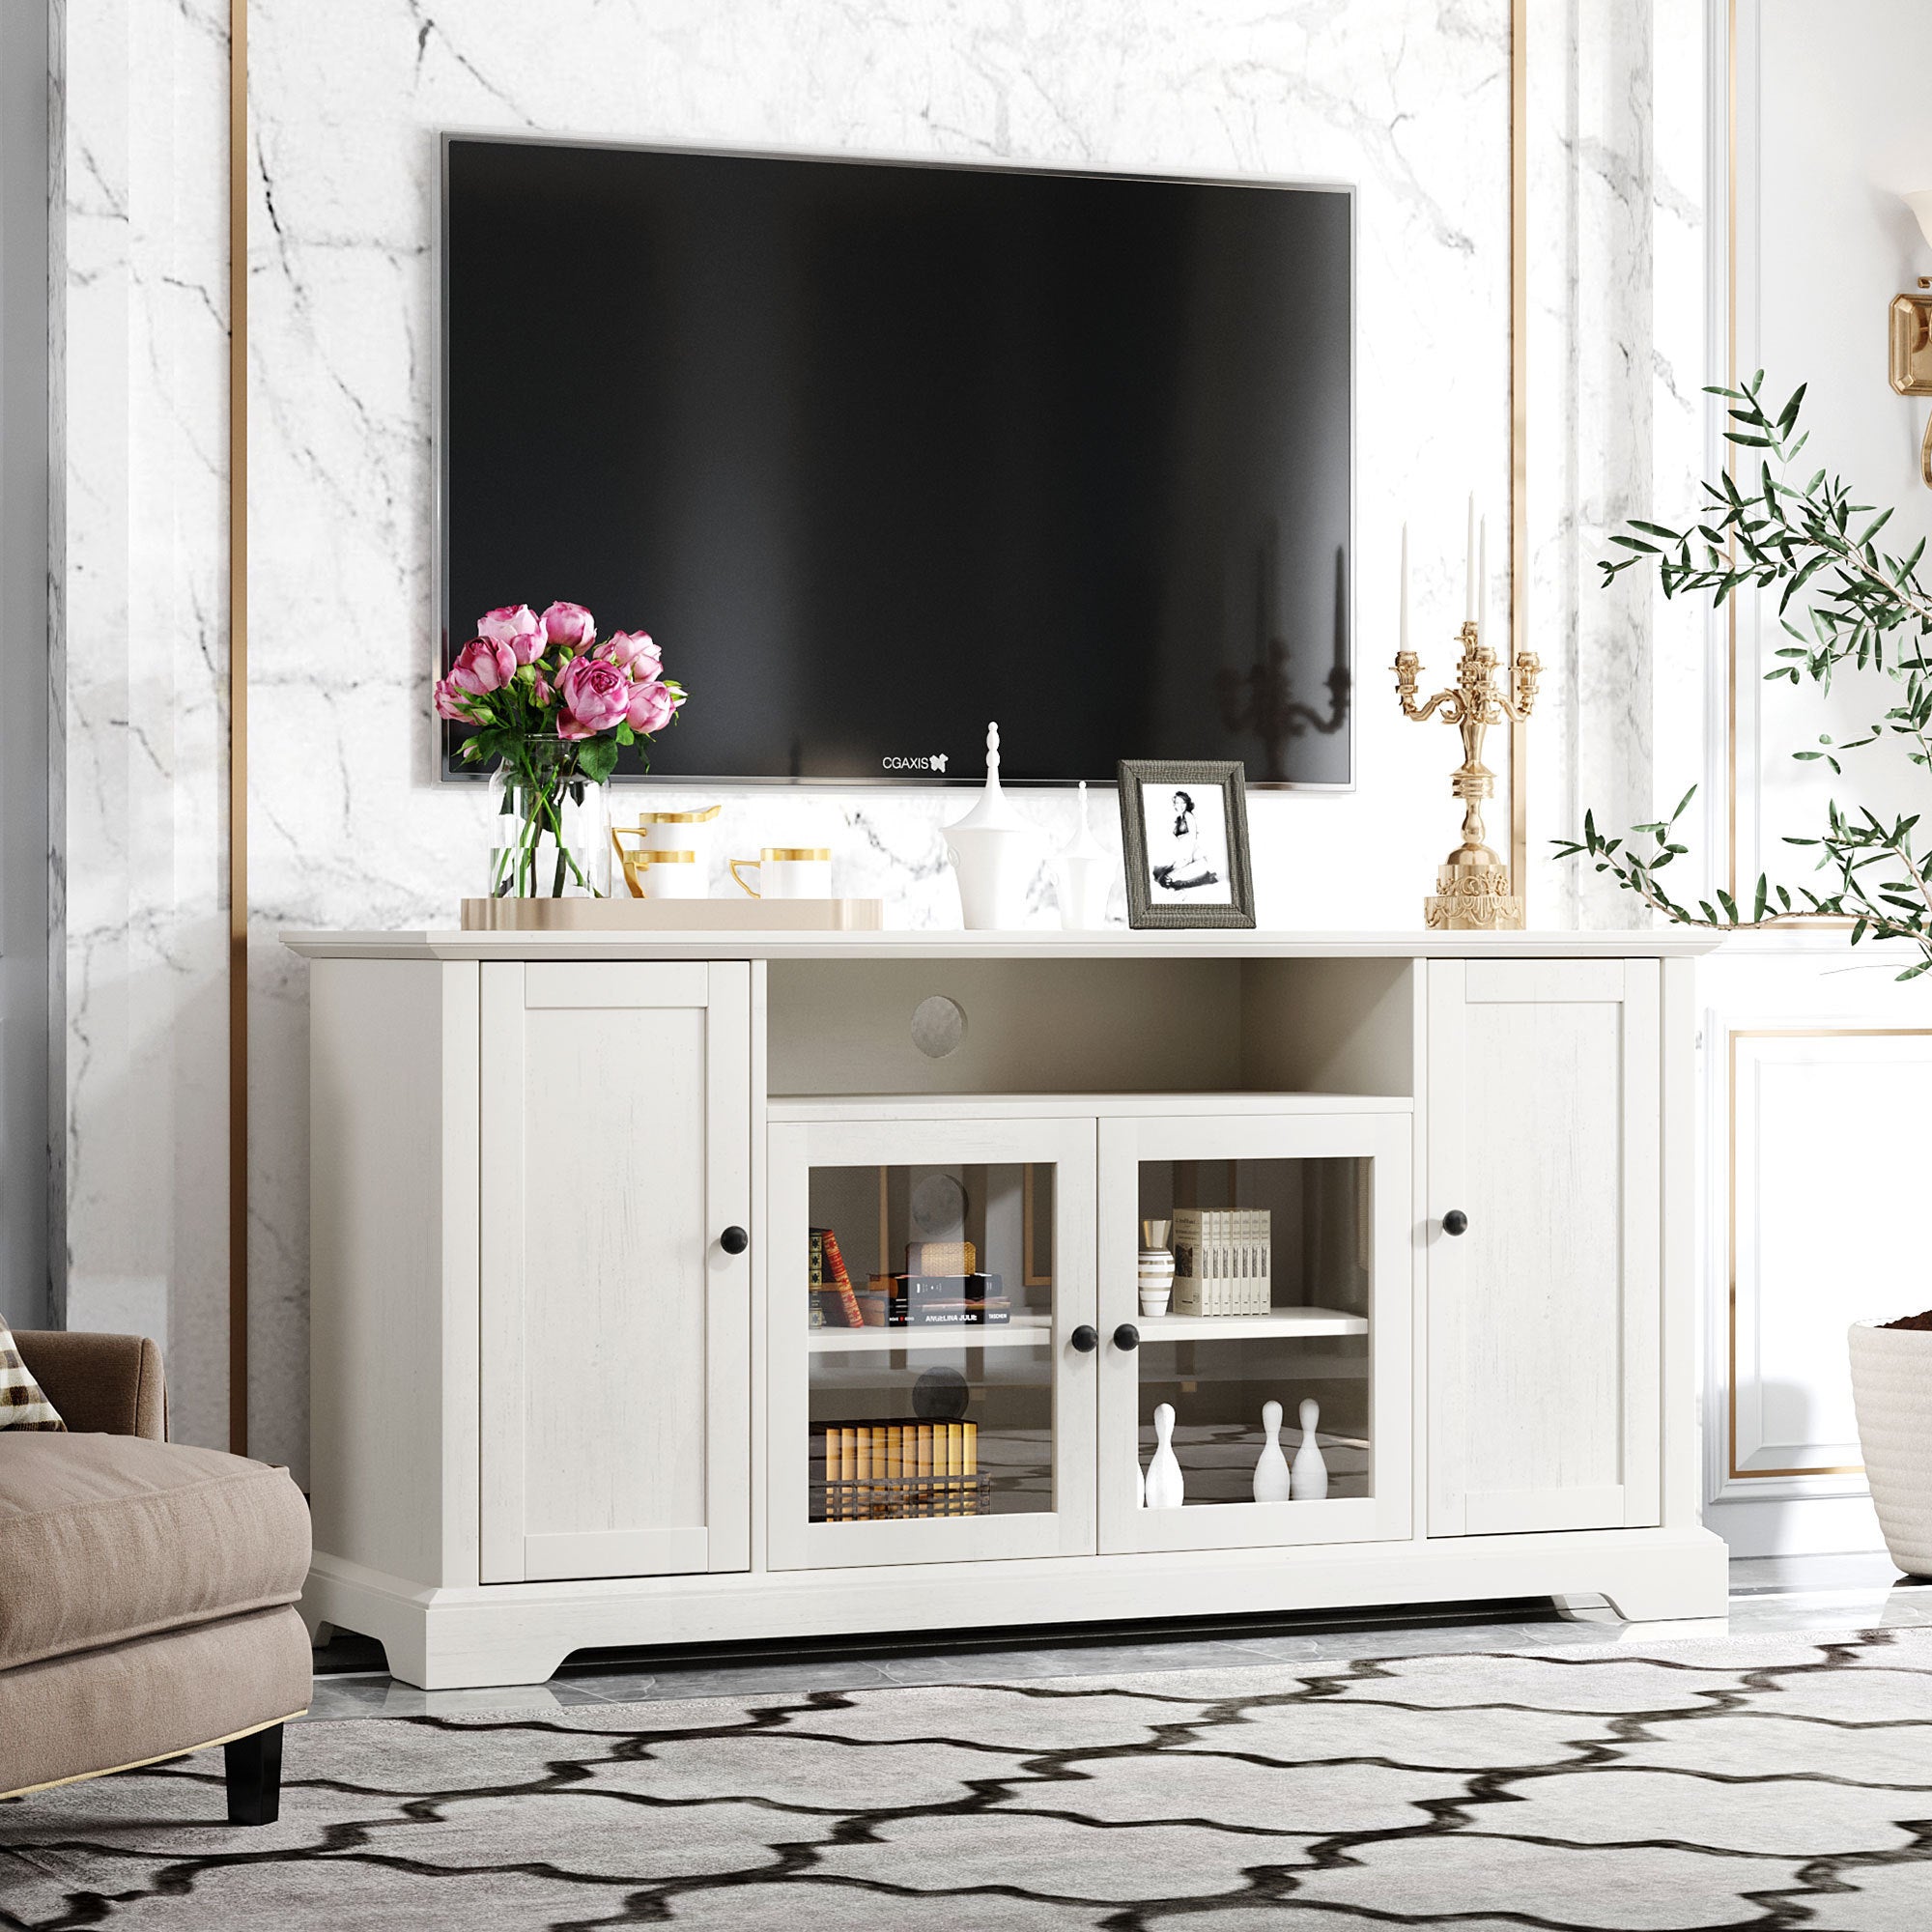 TV Stand with 2 Tempered Glass Doors, Adjustable Panels, Open Style Cabinet & Sideboard for TVs up to 65", White